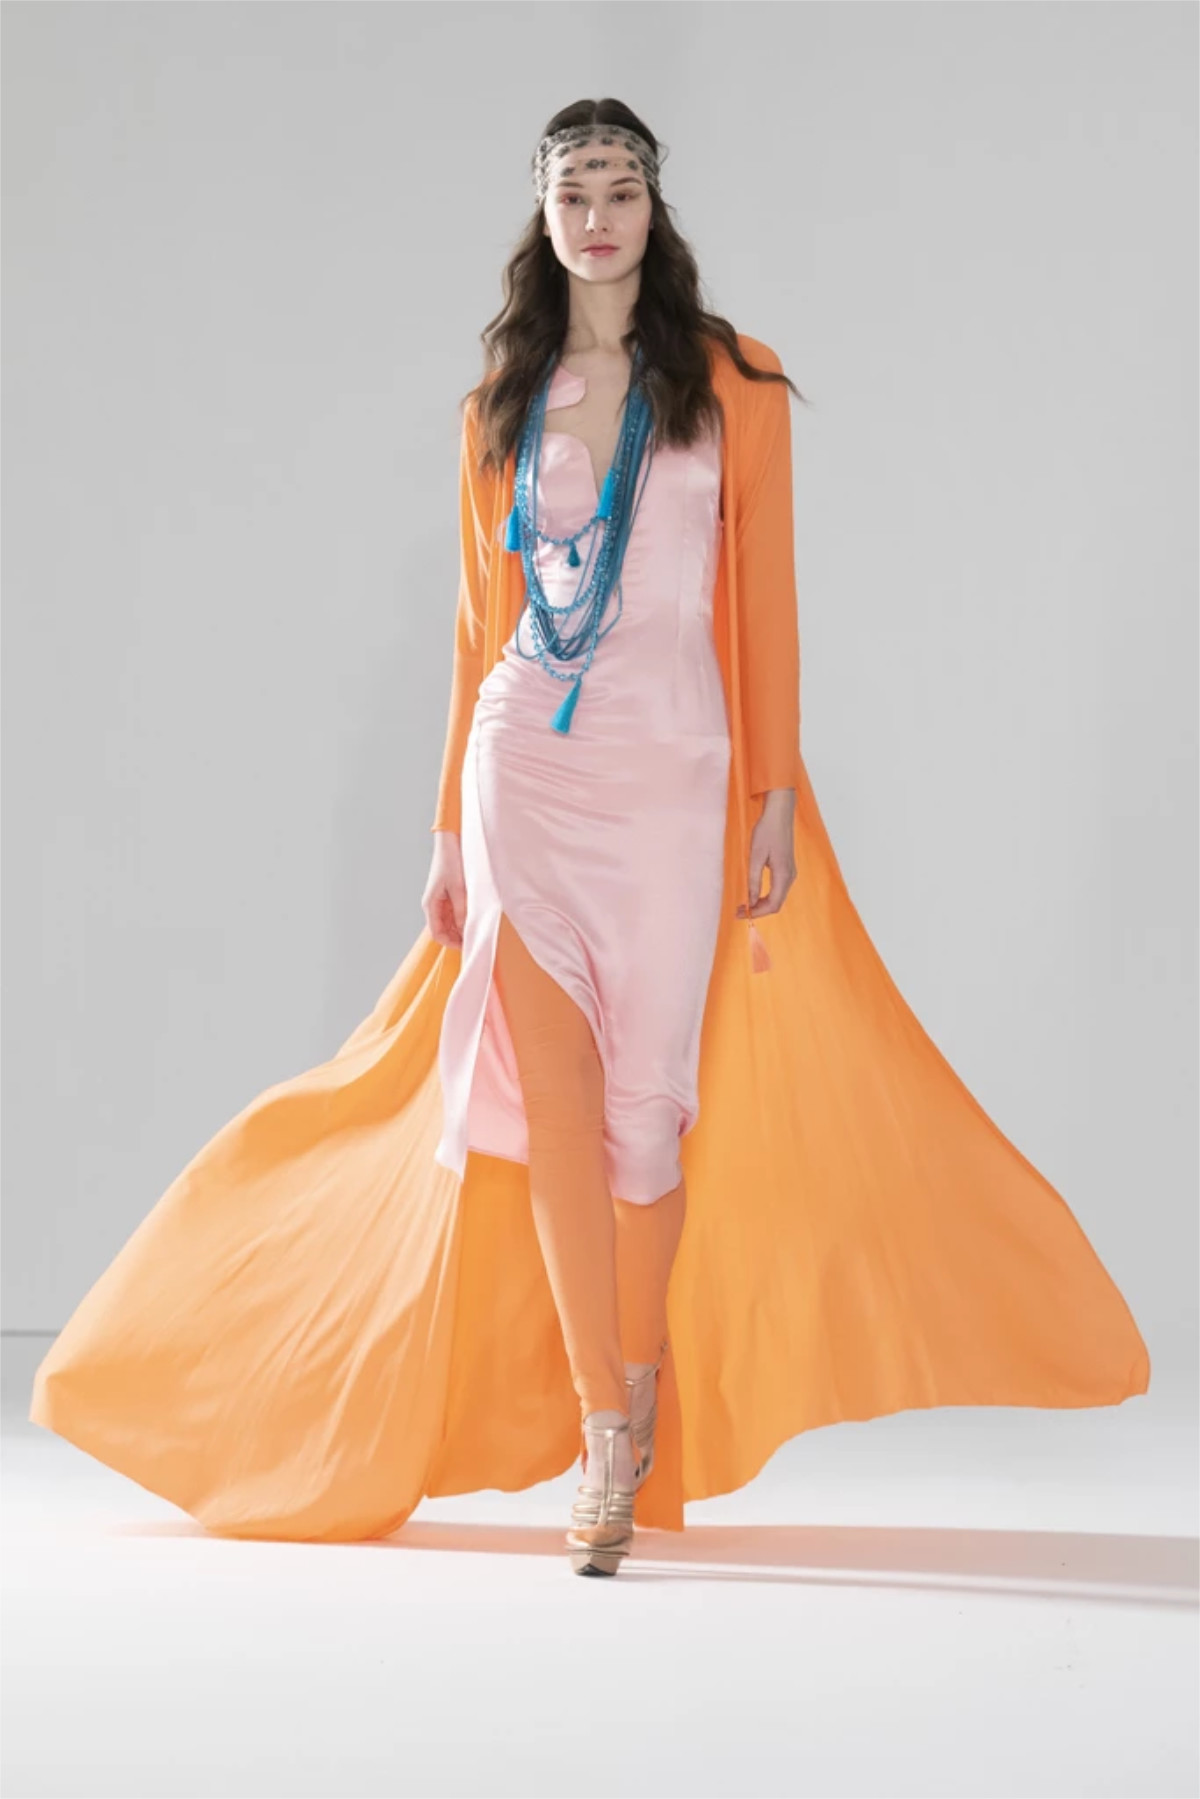 Julien Fournié Presents His New Haute Couture Spring Summer 2023 Collection: First Sunshine